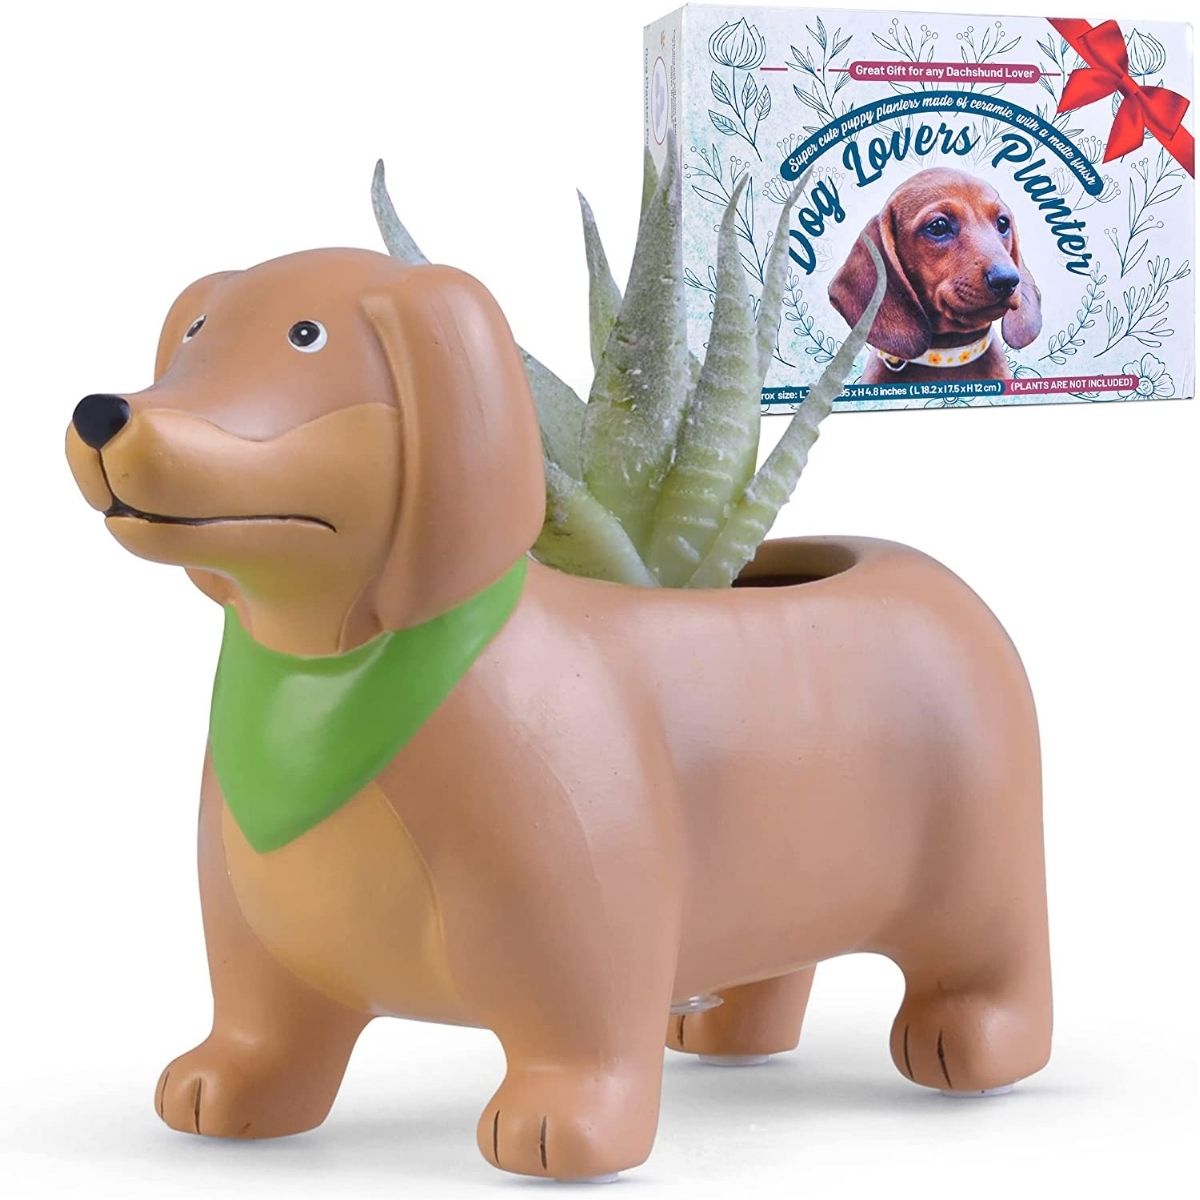 Get This Cute Dachshund Planter Pot Gift For Weiner Dog Lovers & Cactus Fans